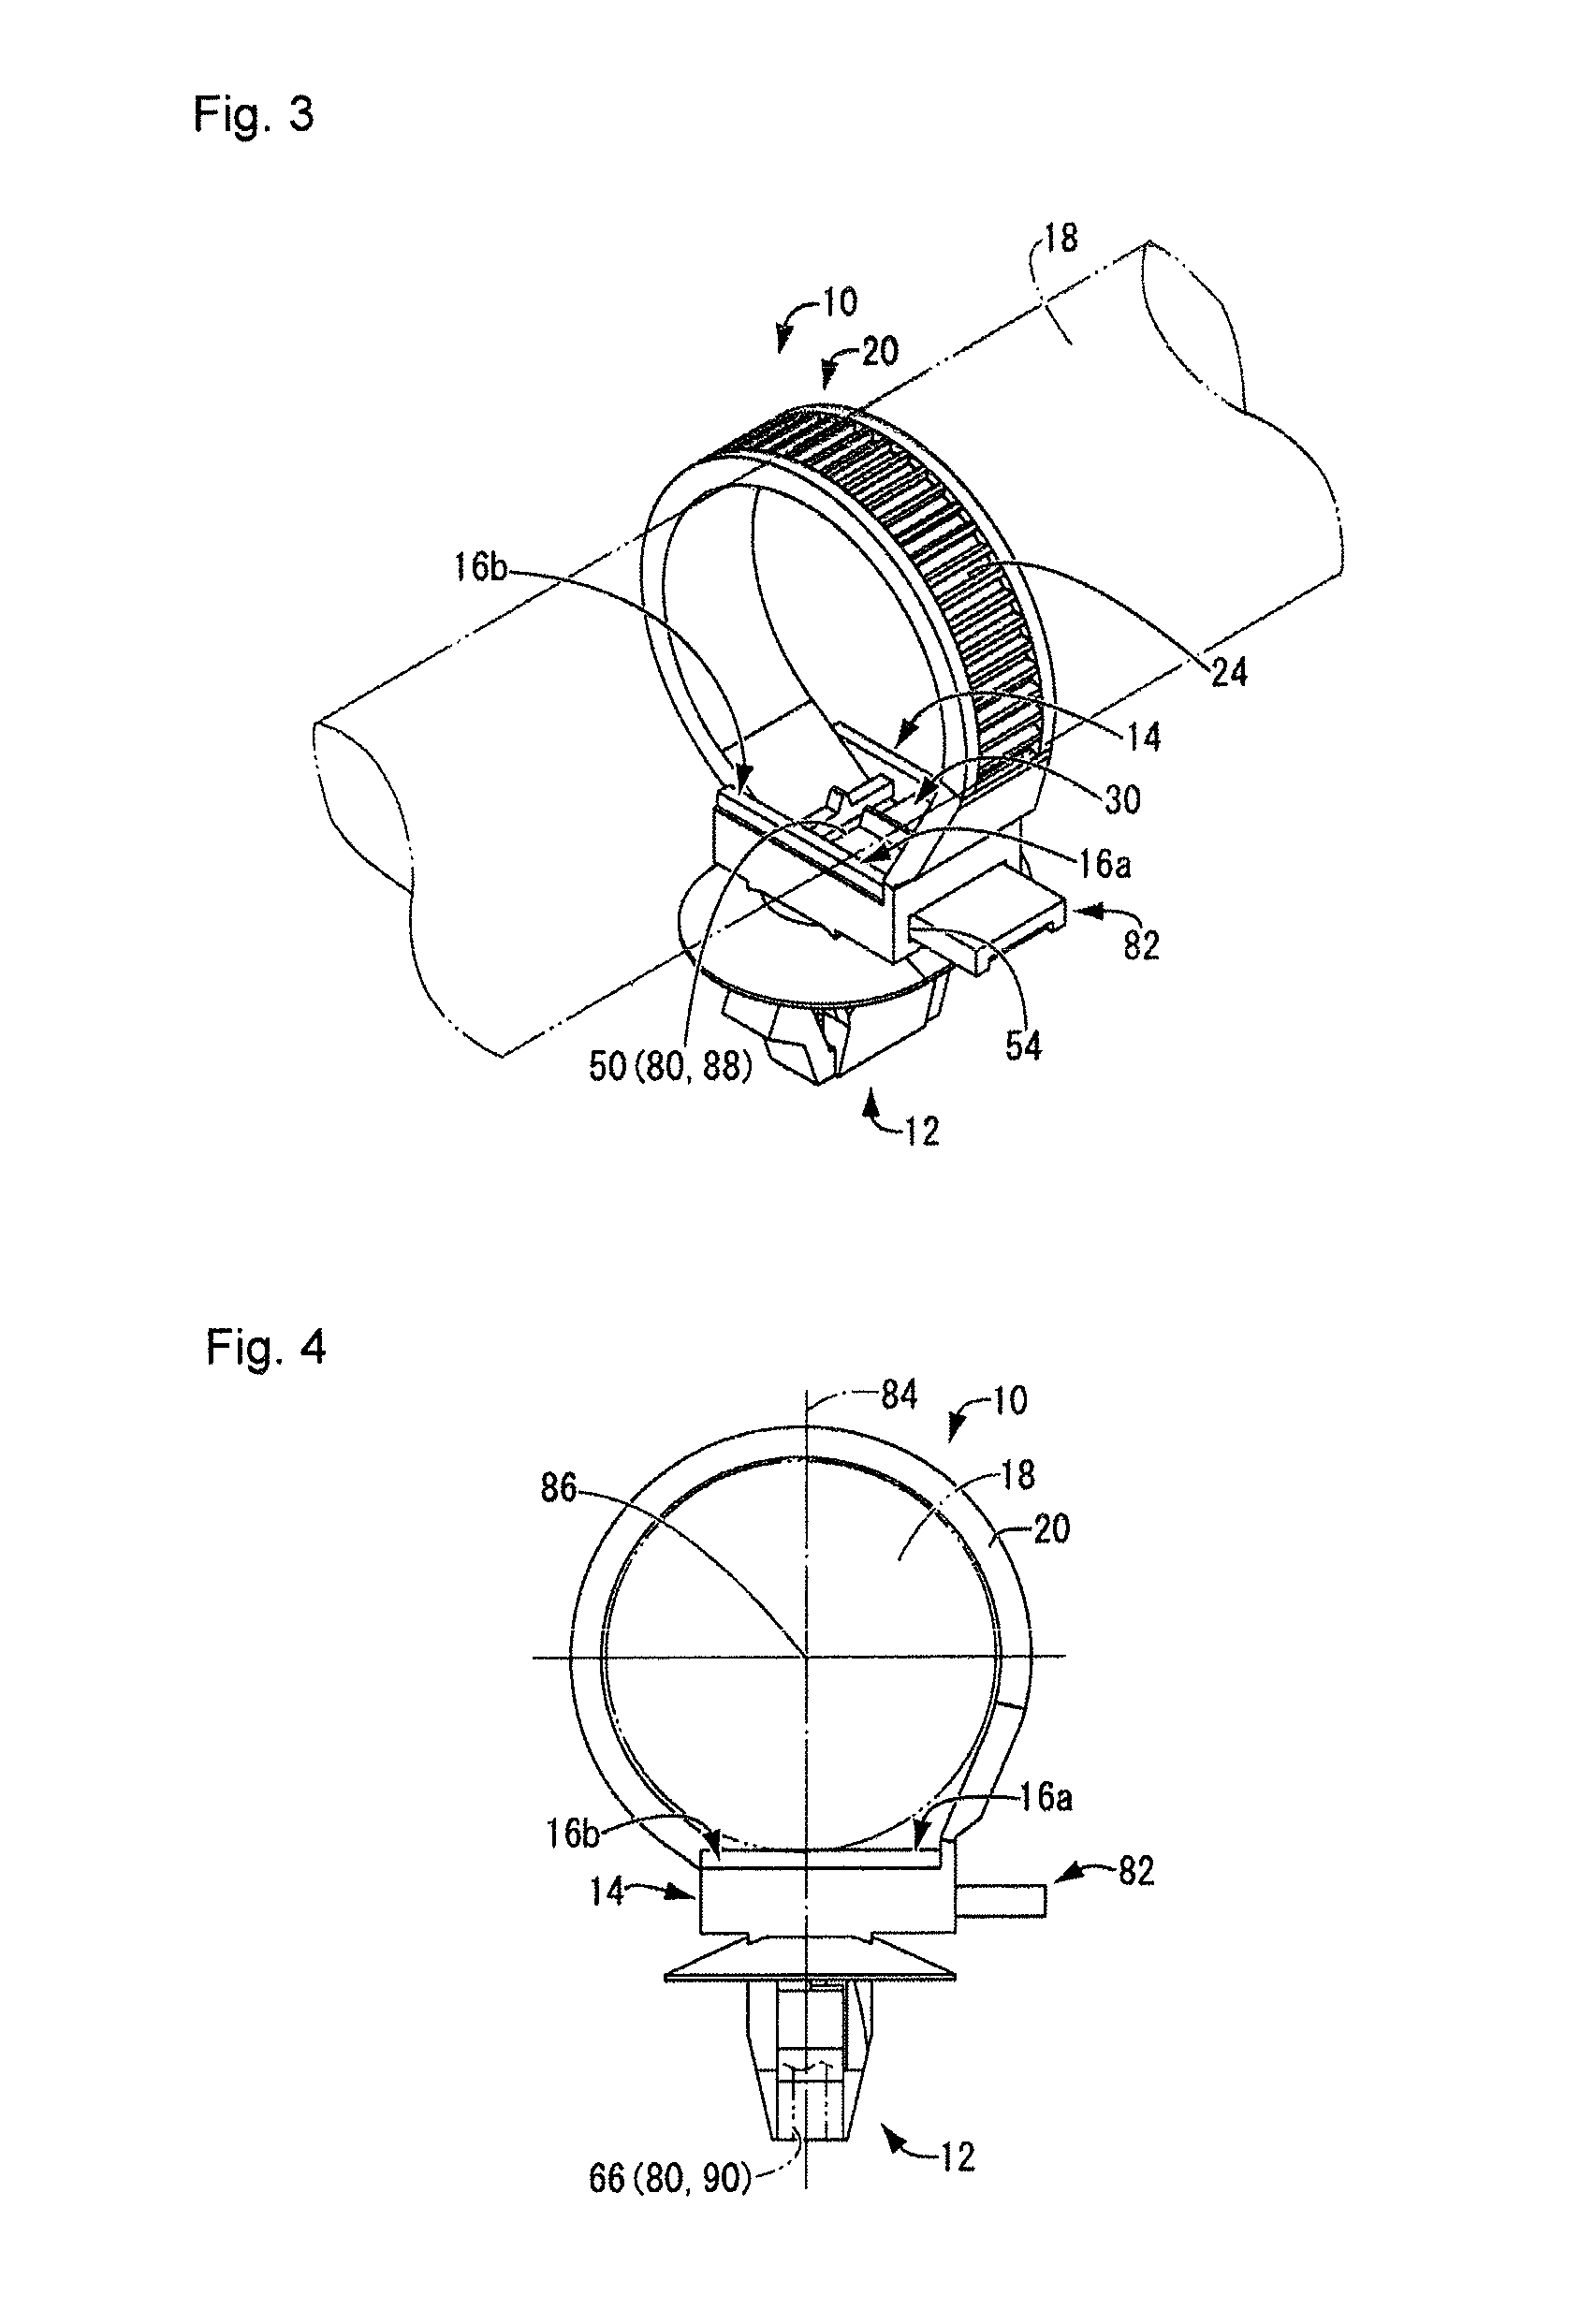 Wire harness fixture and method of producing wire harness with fixture having wire harness fixture attached thereto